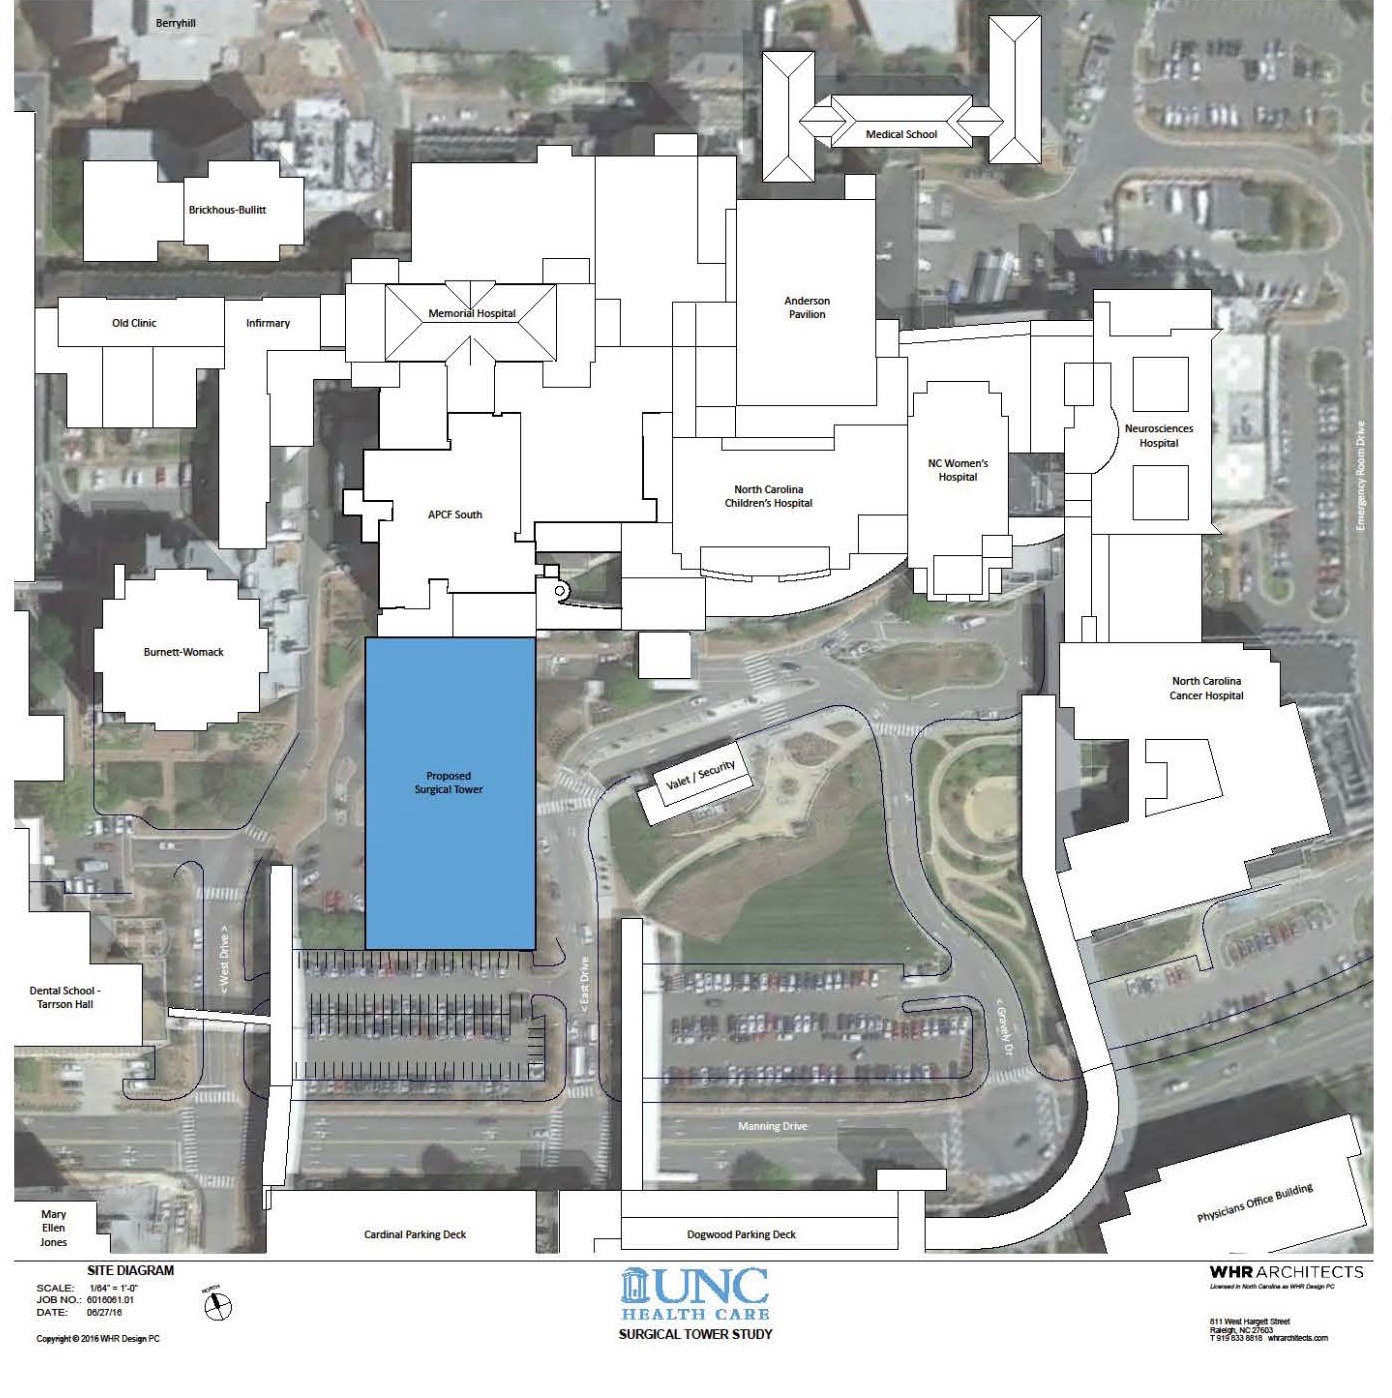 Unc Hospitals Picks Location For Surgical Tower Project In Front Of Nc Memorial Hospital Image2 